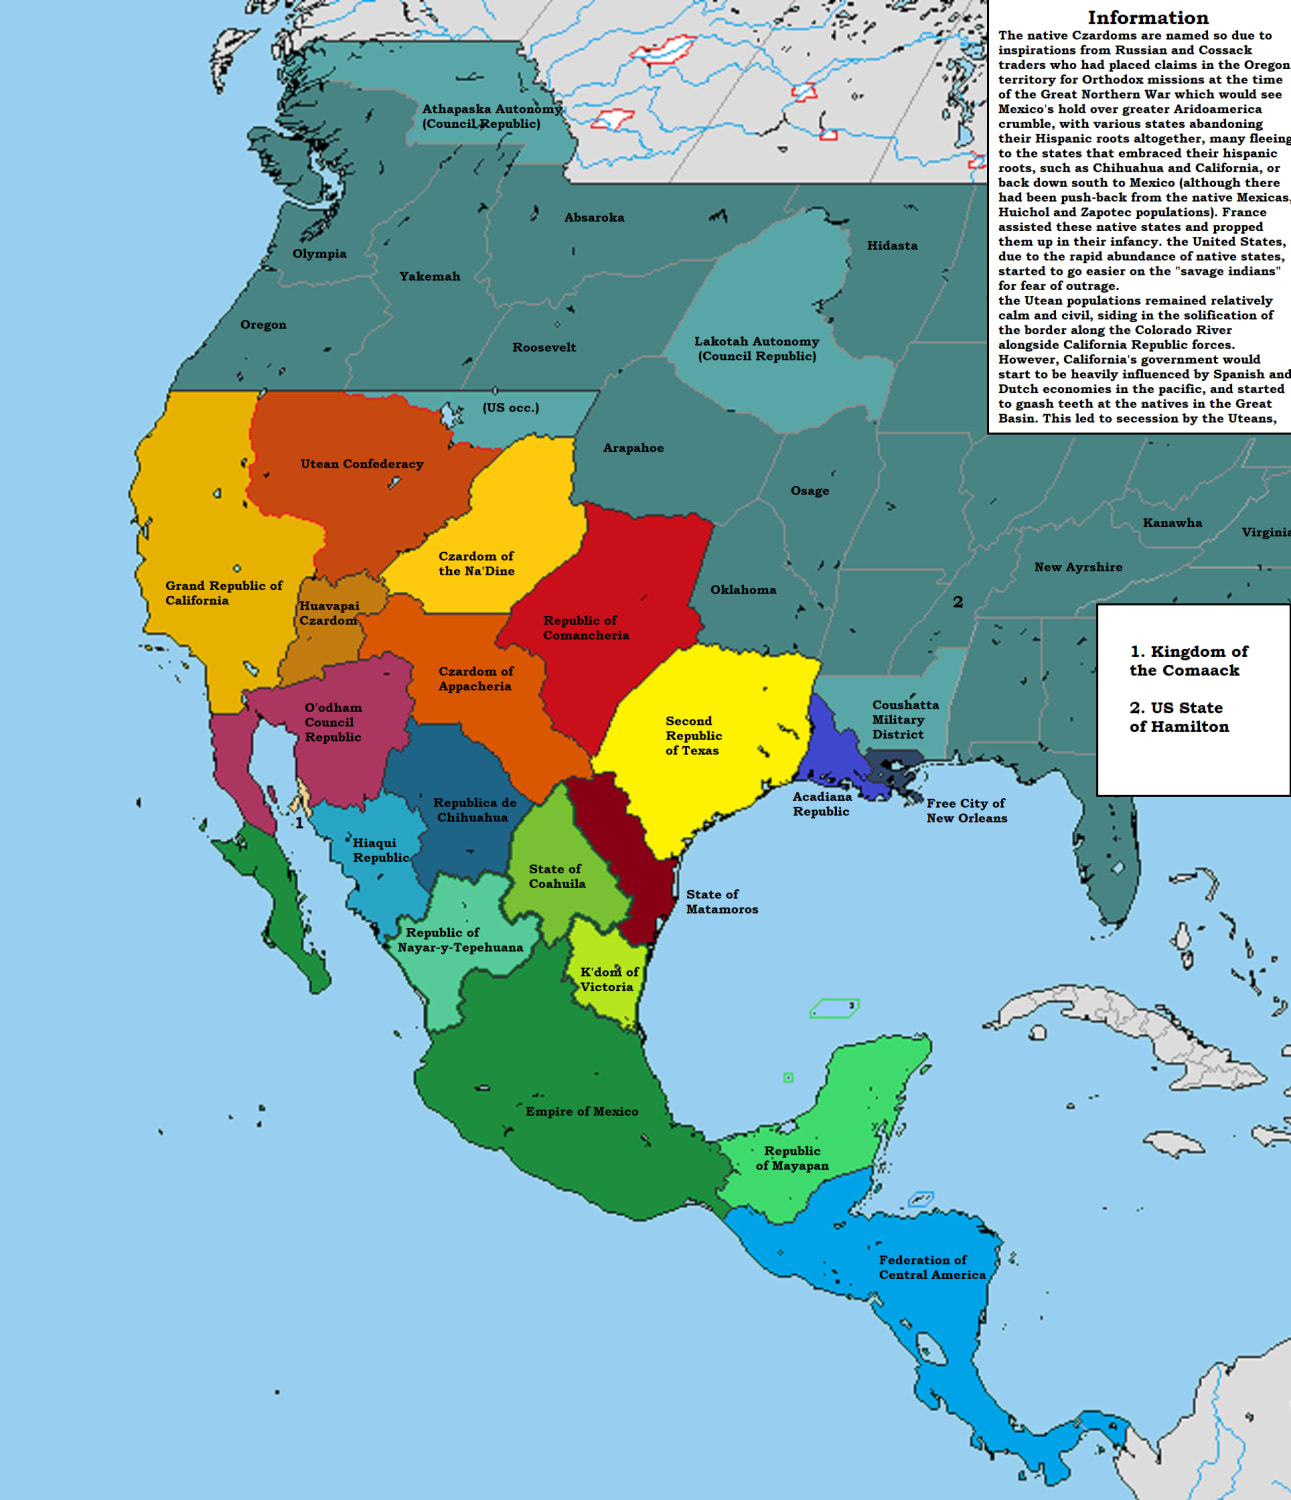 A story of if the US didn't help Texas, and native states assisted by the Napoleonic regime were formed out of the north of Mexico in the 1850s. Lore is a little flimsy, so don't pay it much mind.